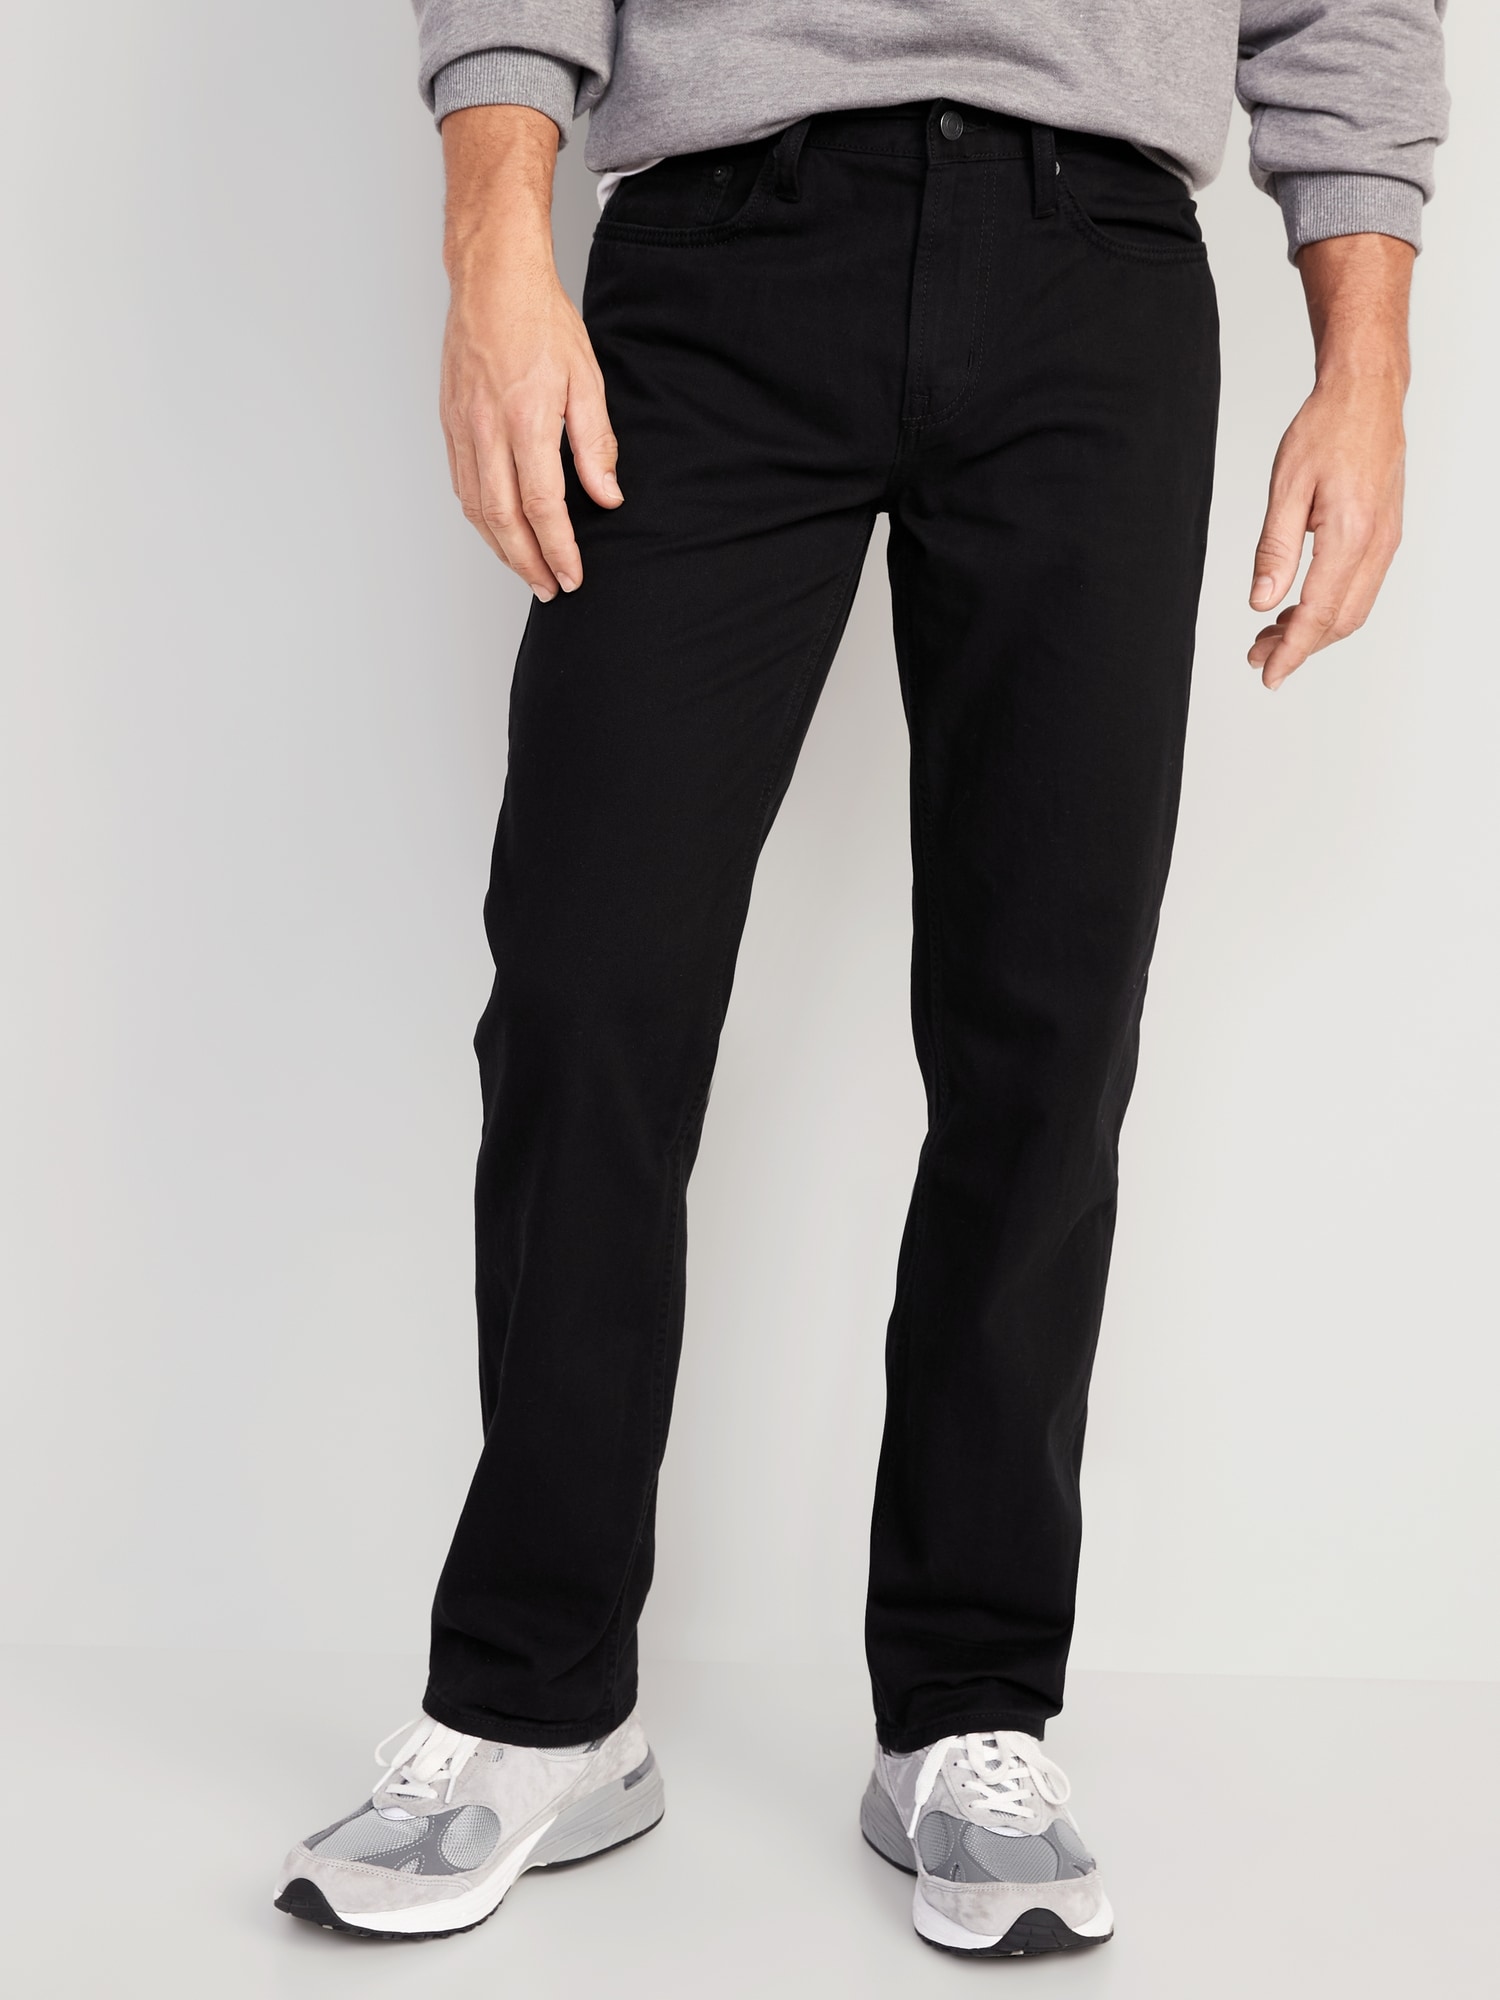 Wow Loose Non-Stretch Black Jeans